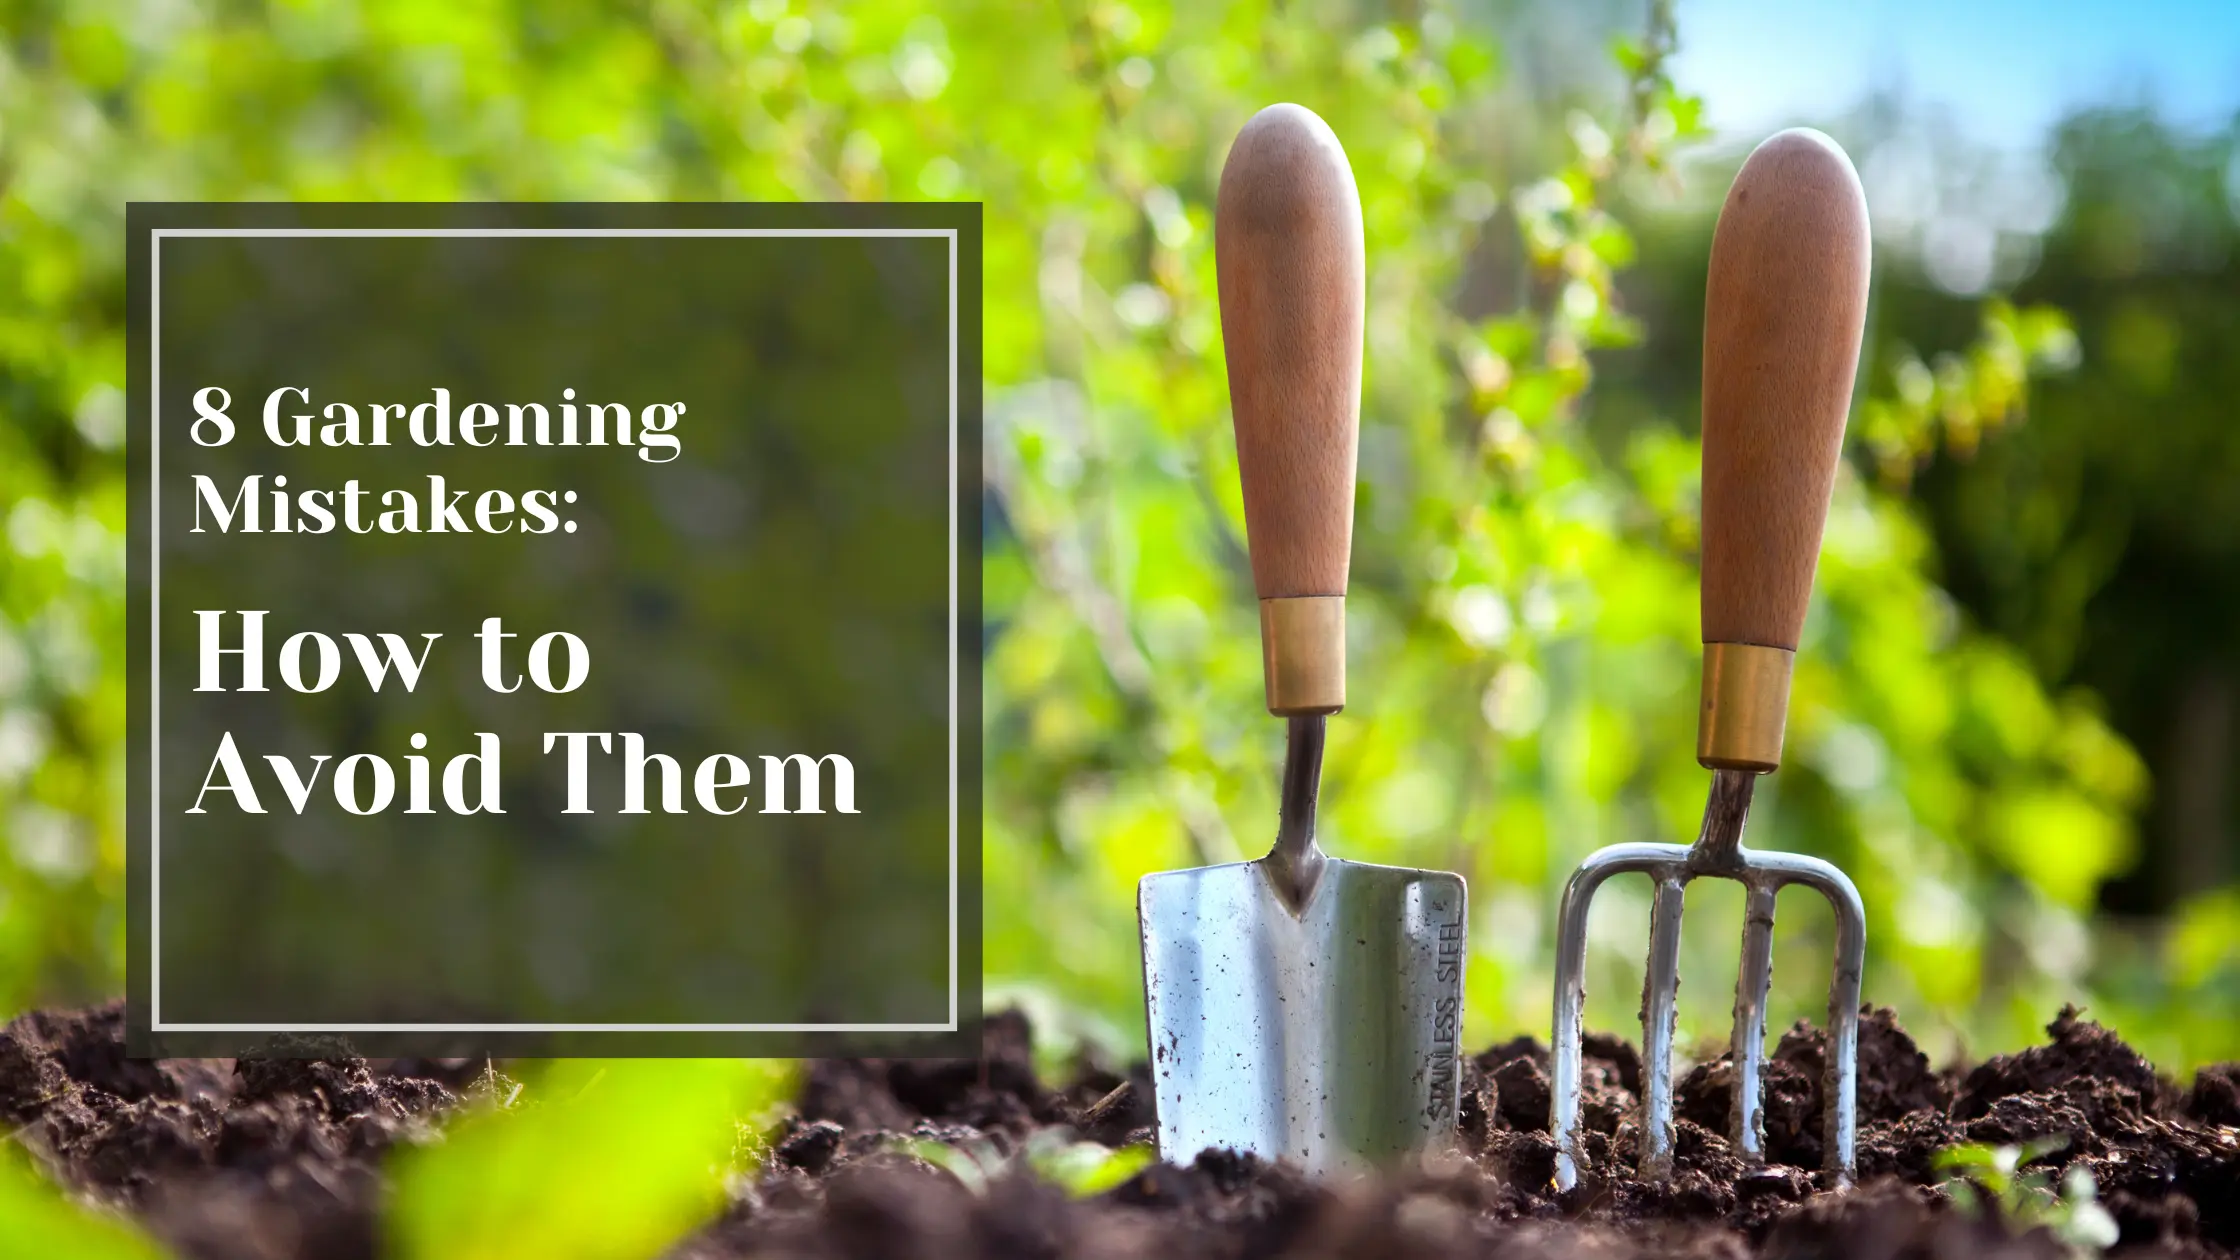 8 Gardening Mistakes: How to Avoid Them